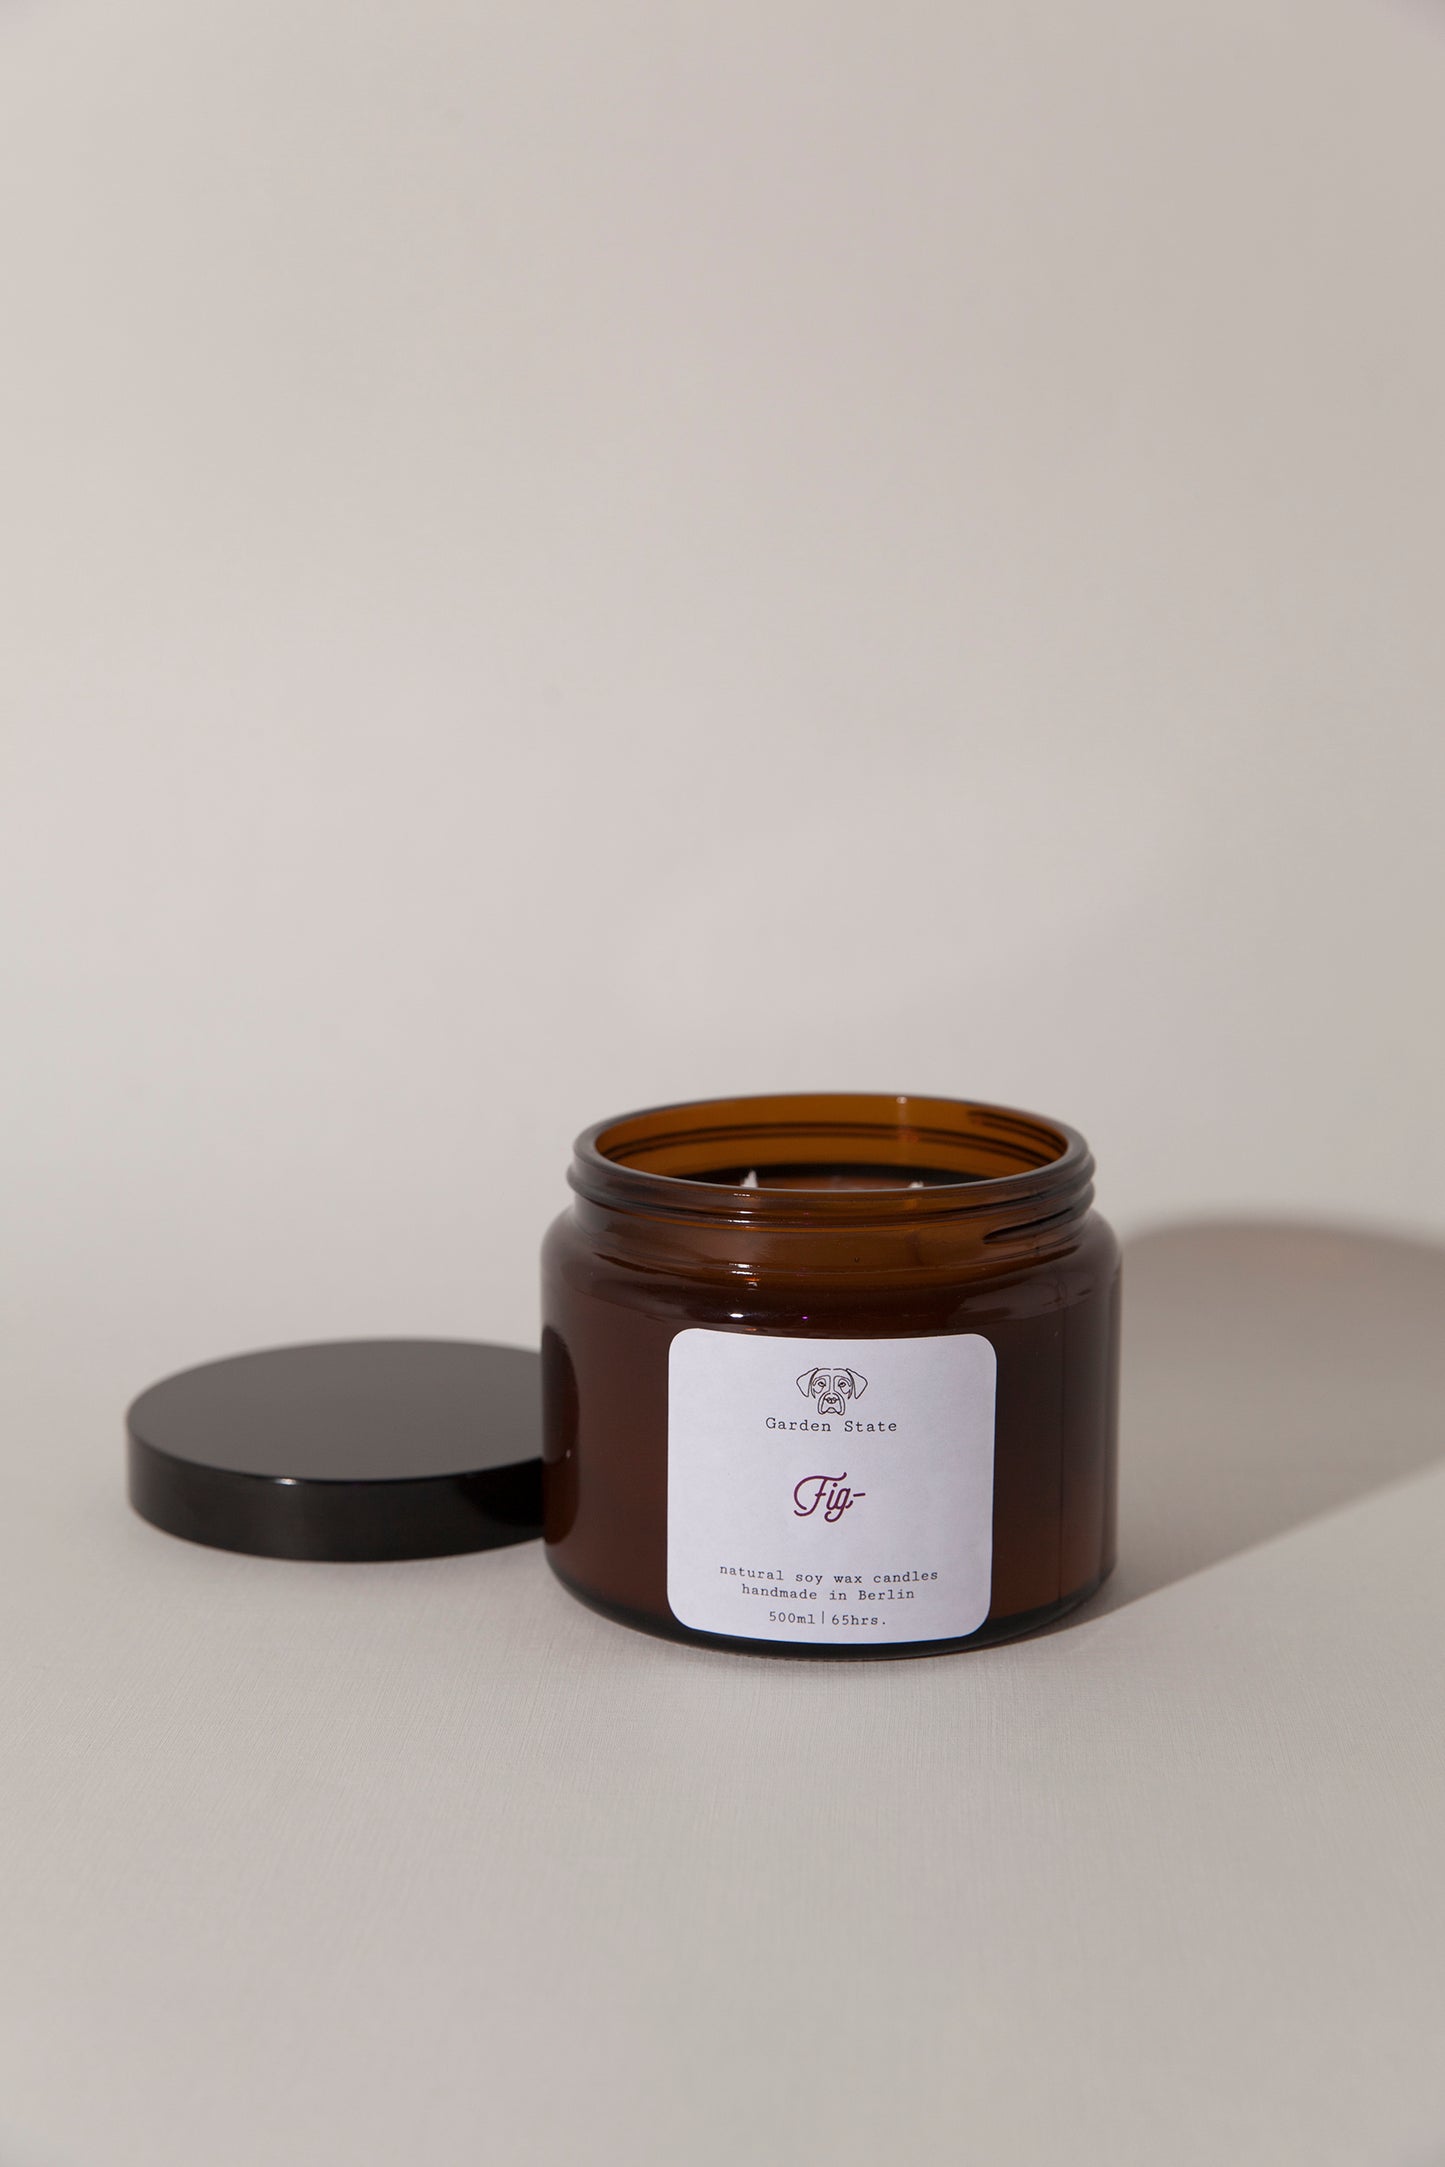 Fig Scented Candle